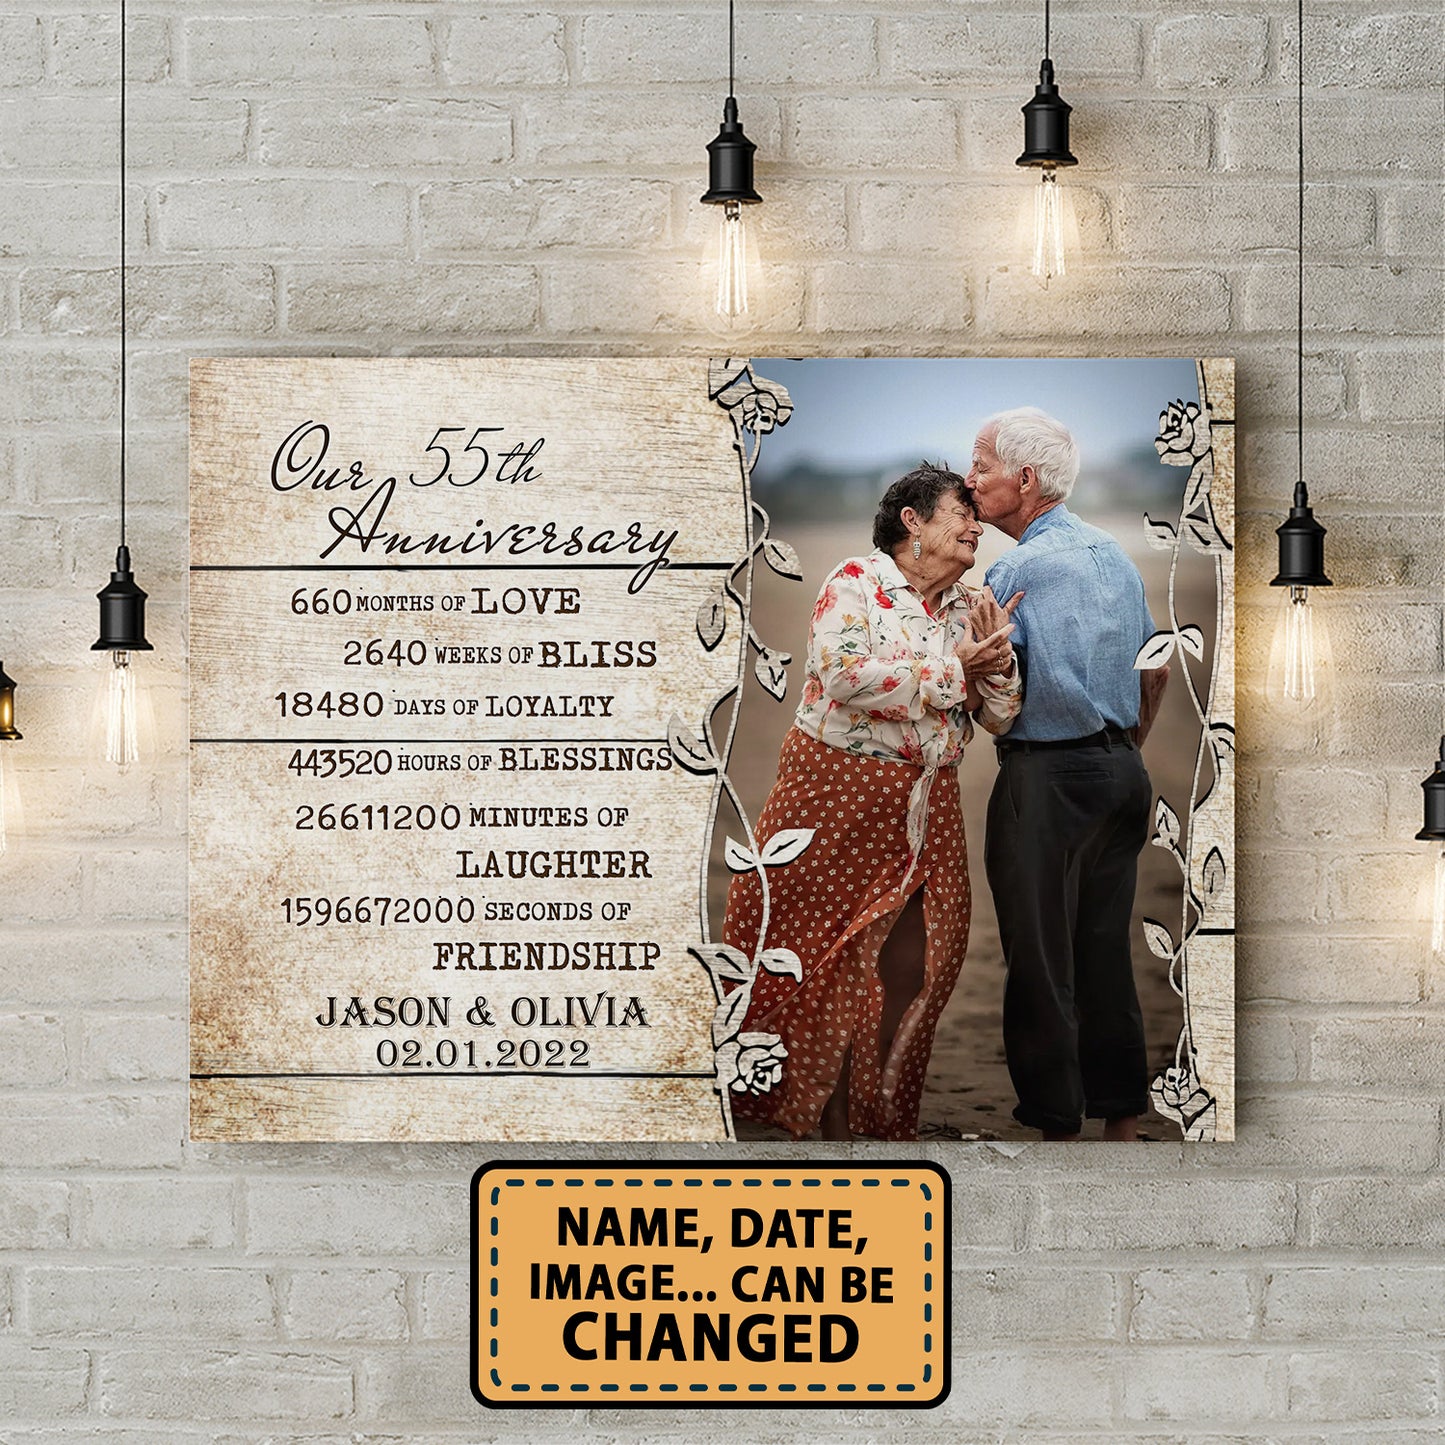 Our 55th Anniversary Timeless love Valentine Gift Personalized Canvas